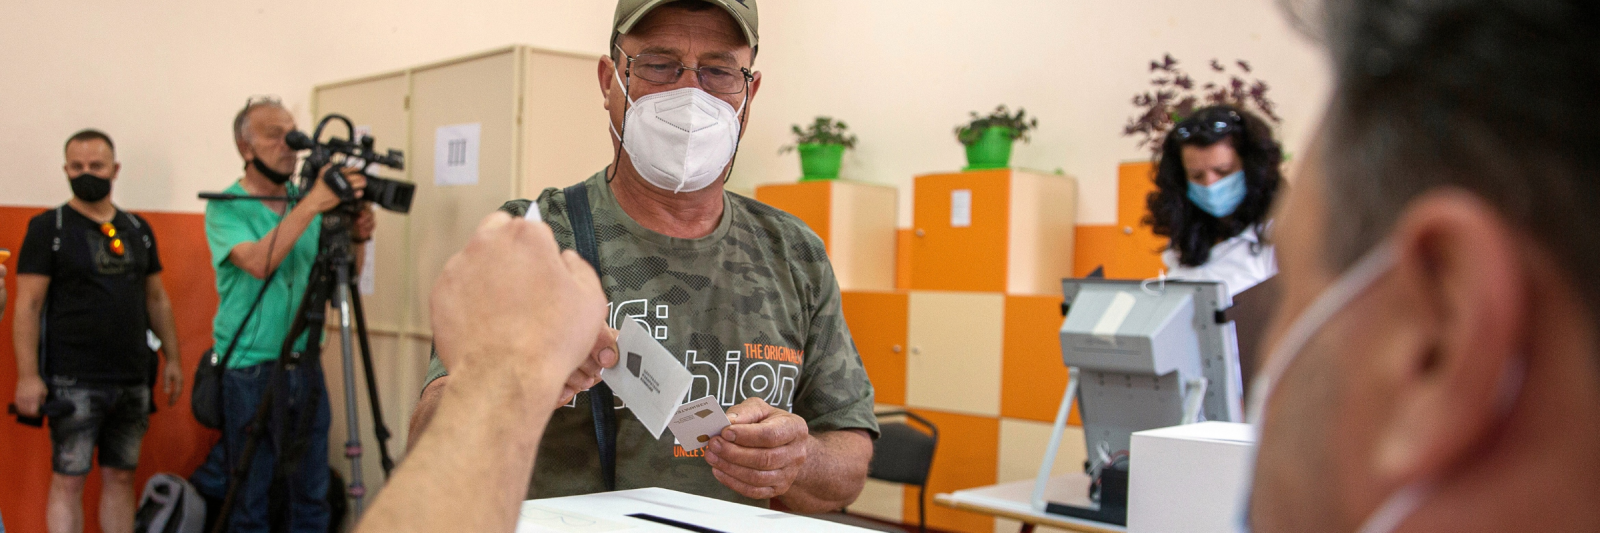 A man wearing a face mask casts his vote into a white ballot box inside a polling station.